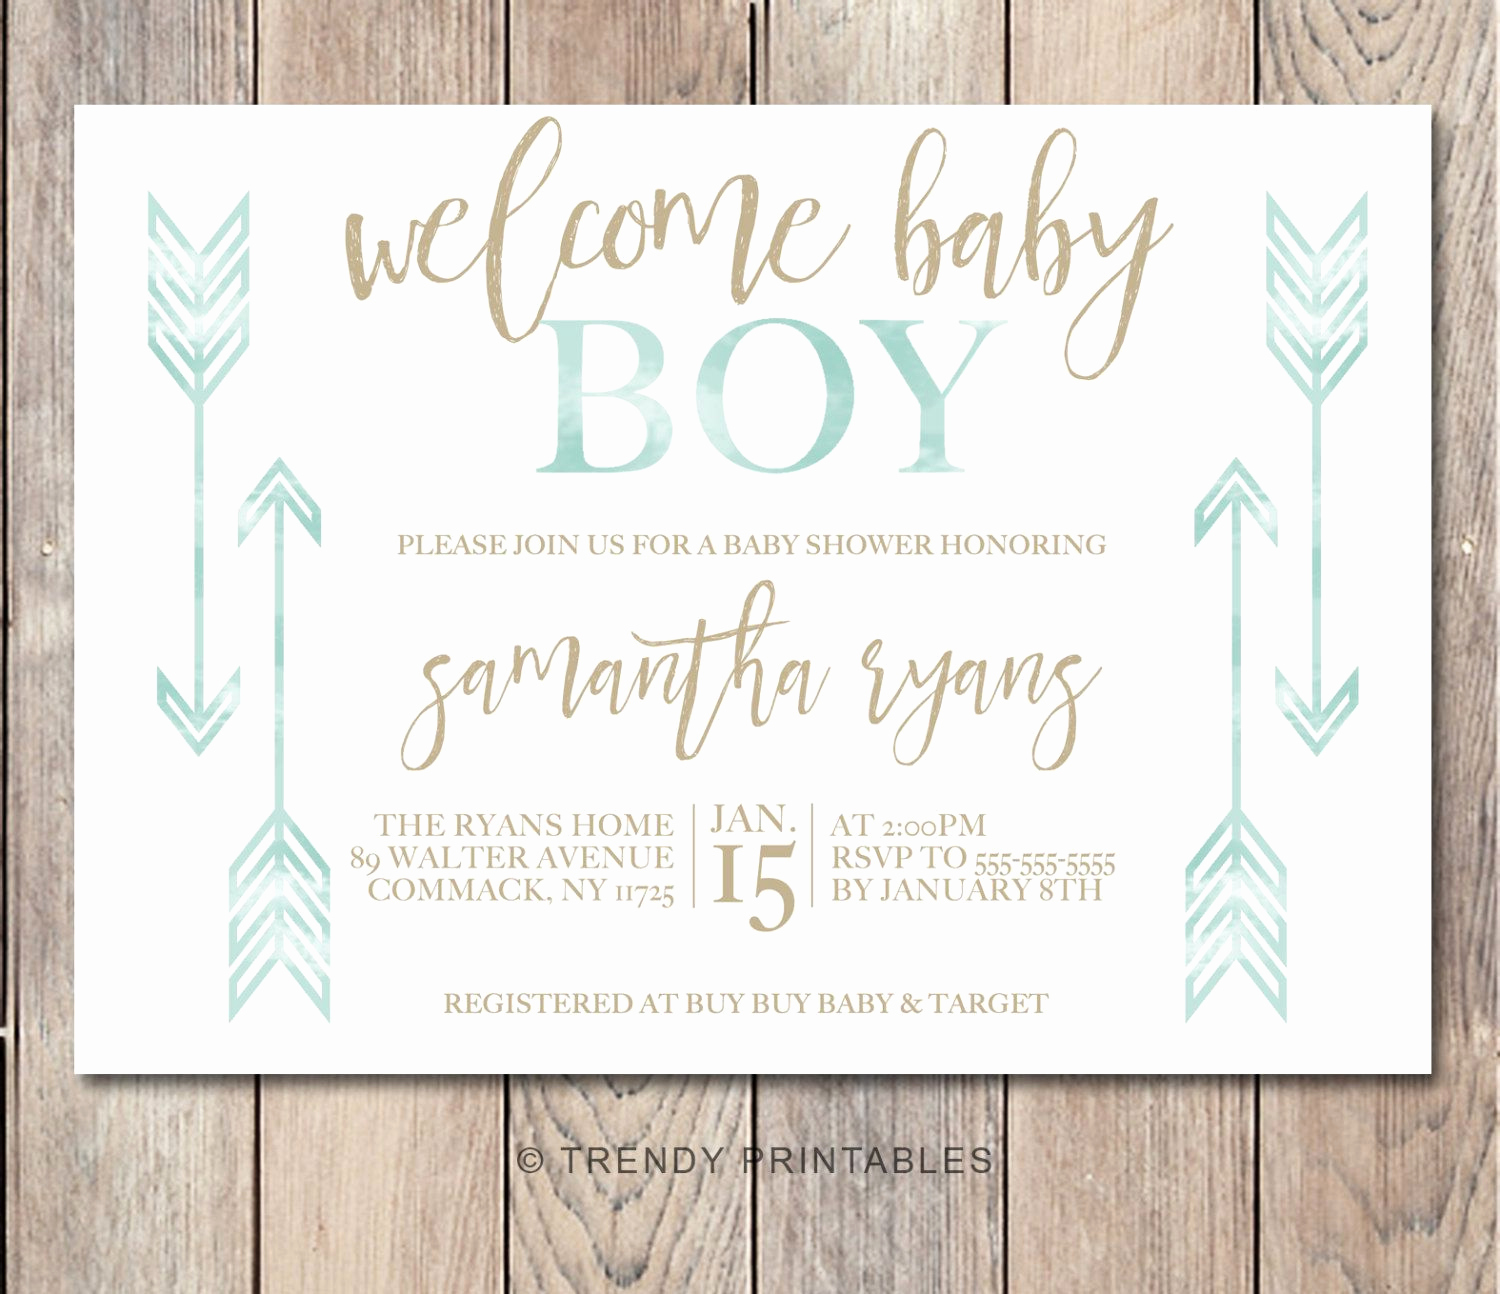 Baby Shower Invitation Ideas Best Of Blank Invitation Templates Free for Word Free Line